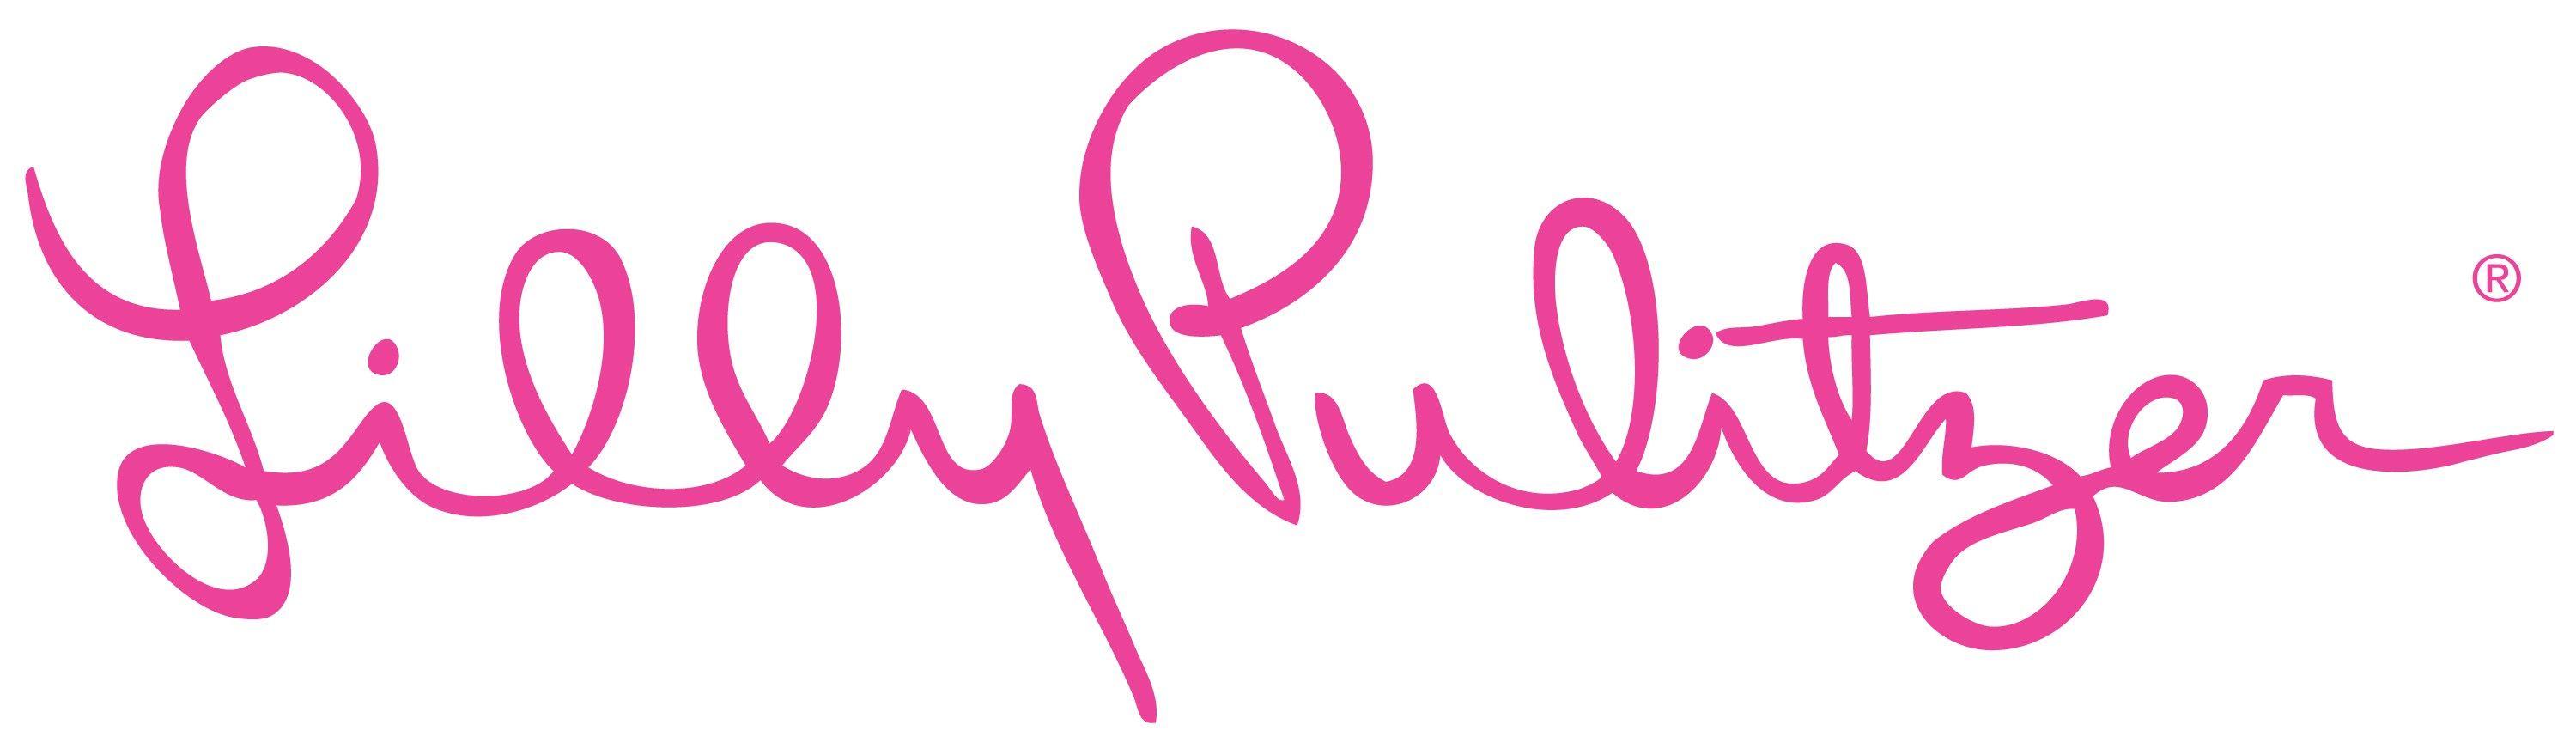 Lilly Pulitzer Logo - Lilly Pulitzer Logo - The First Tee of Greater Philadelphia